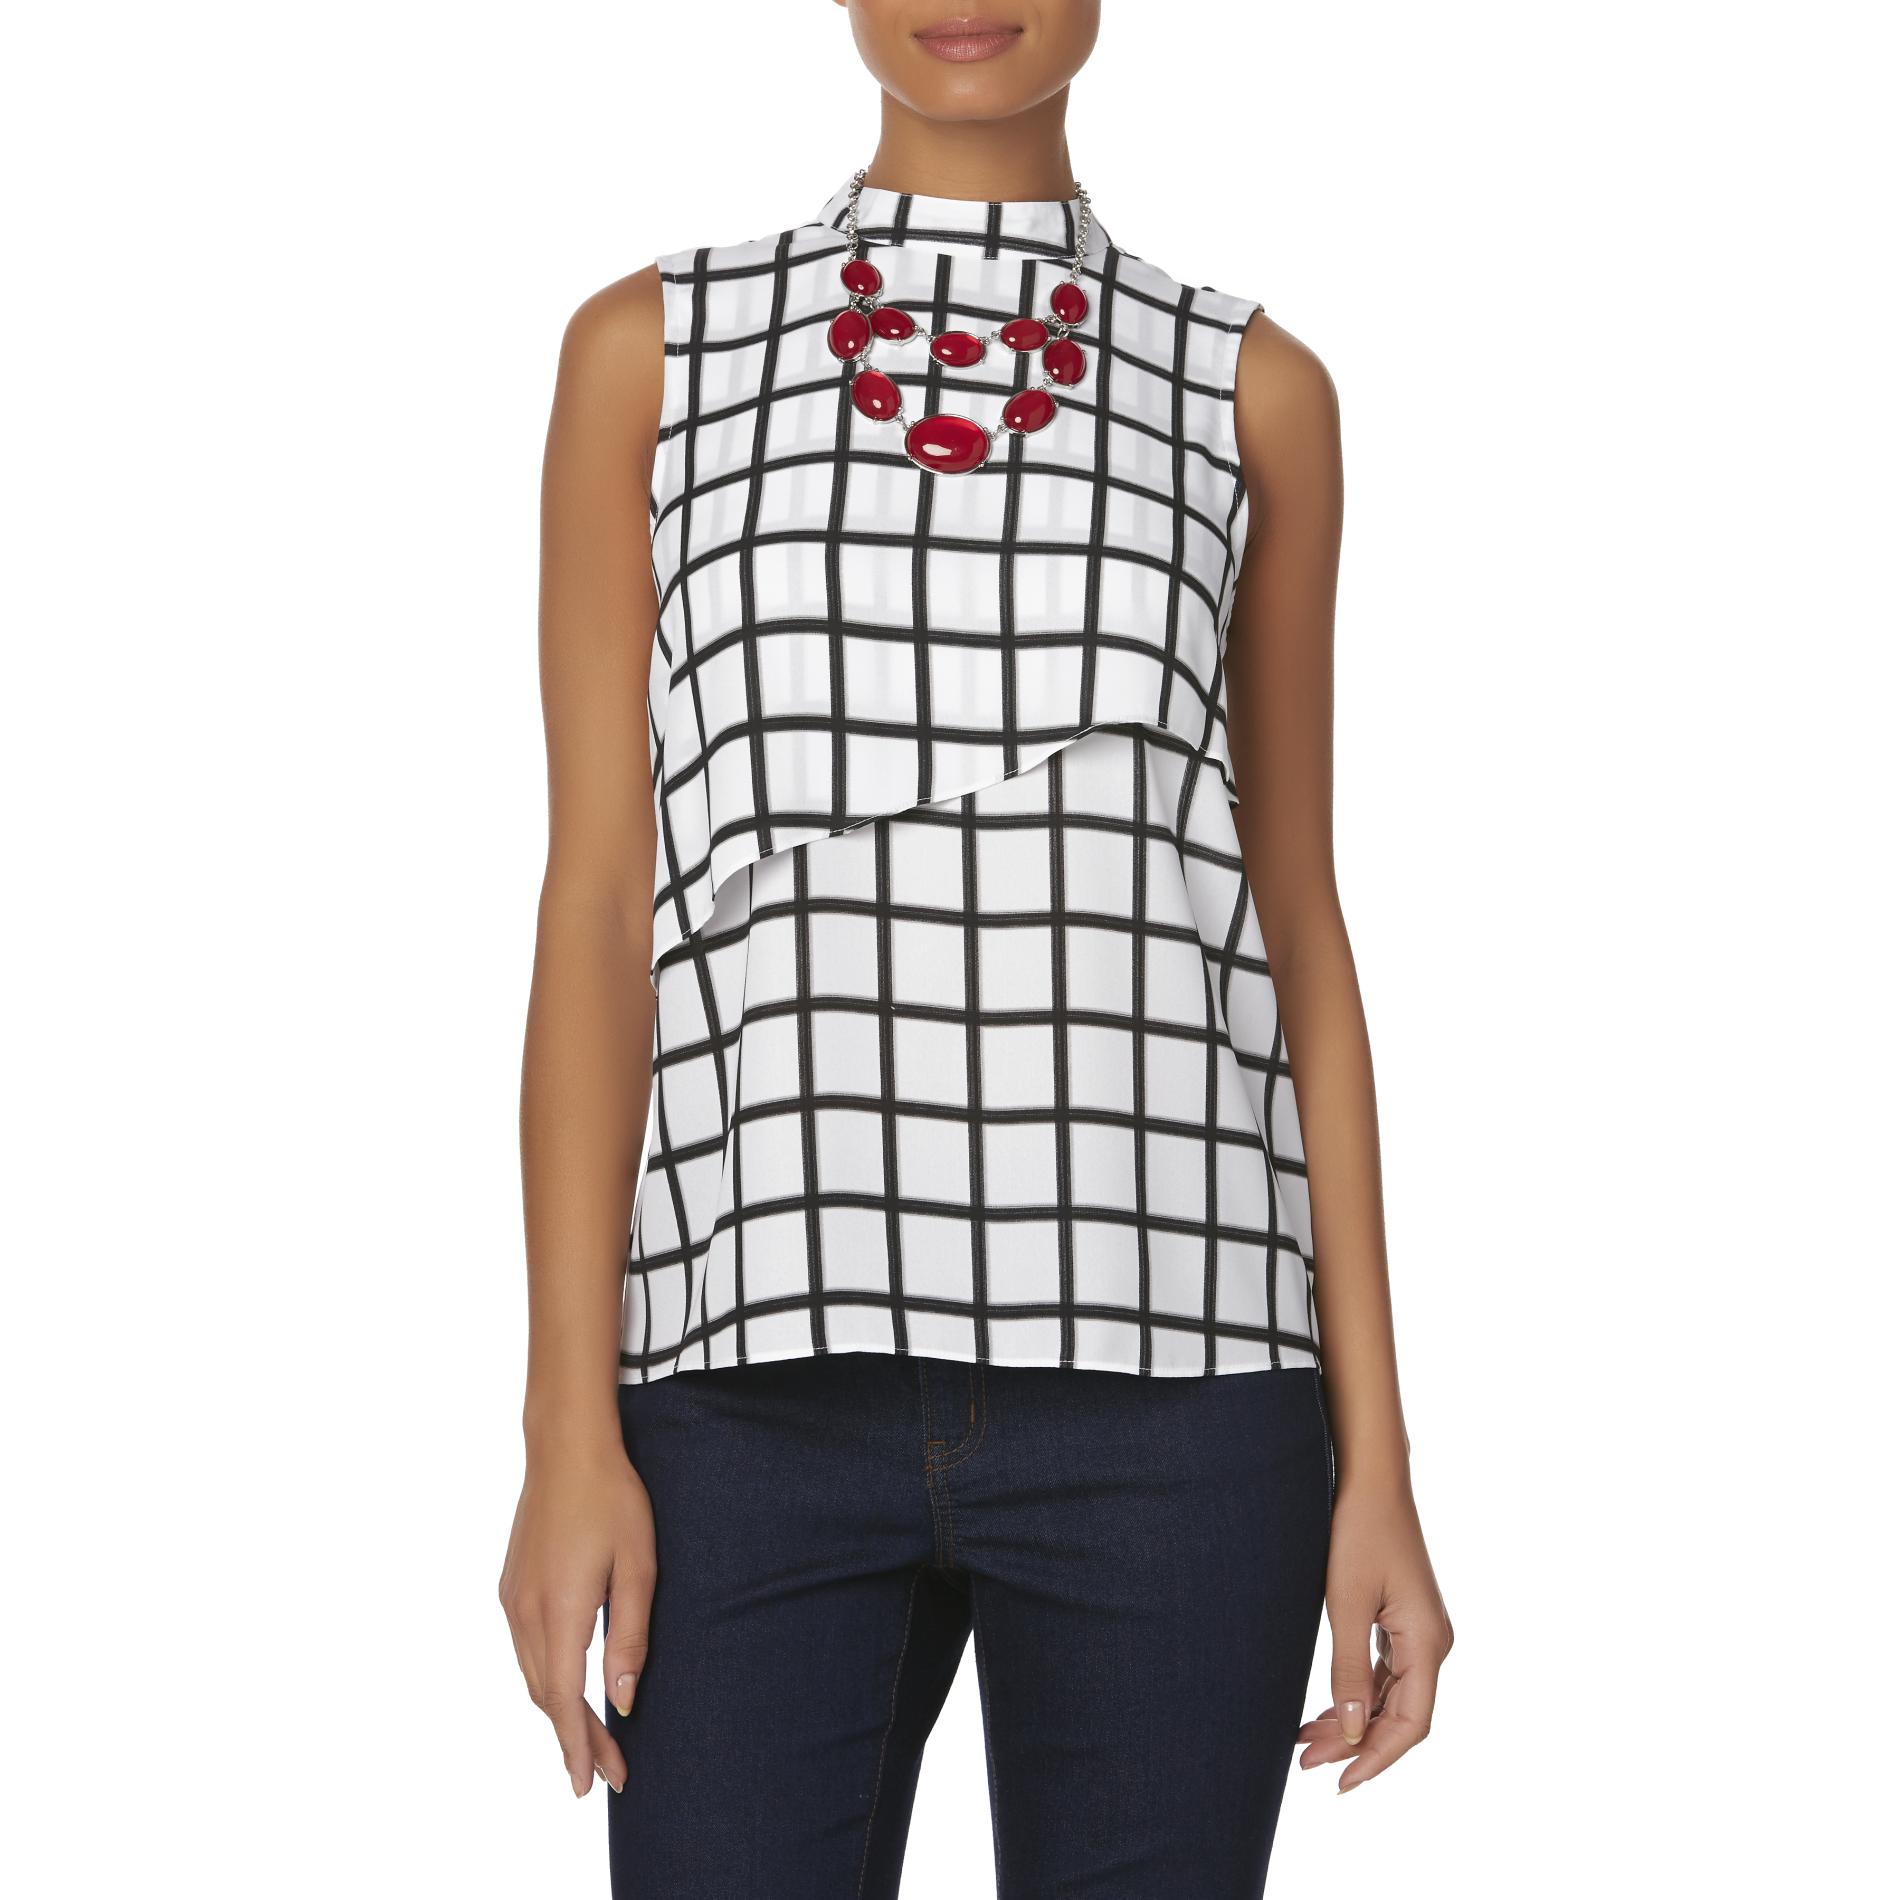 Jaclyn Smith Women's Tiered Sleeveless Blouse - Grid